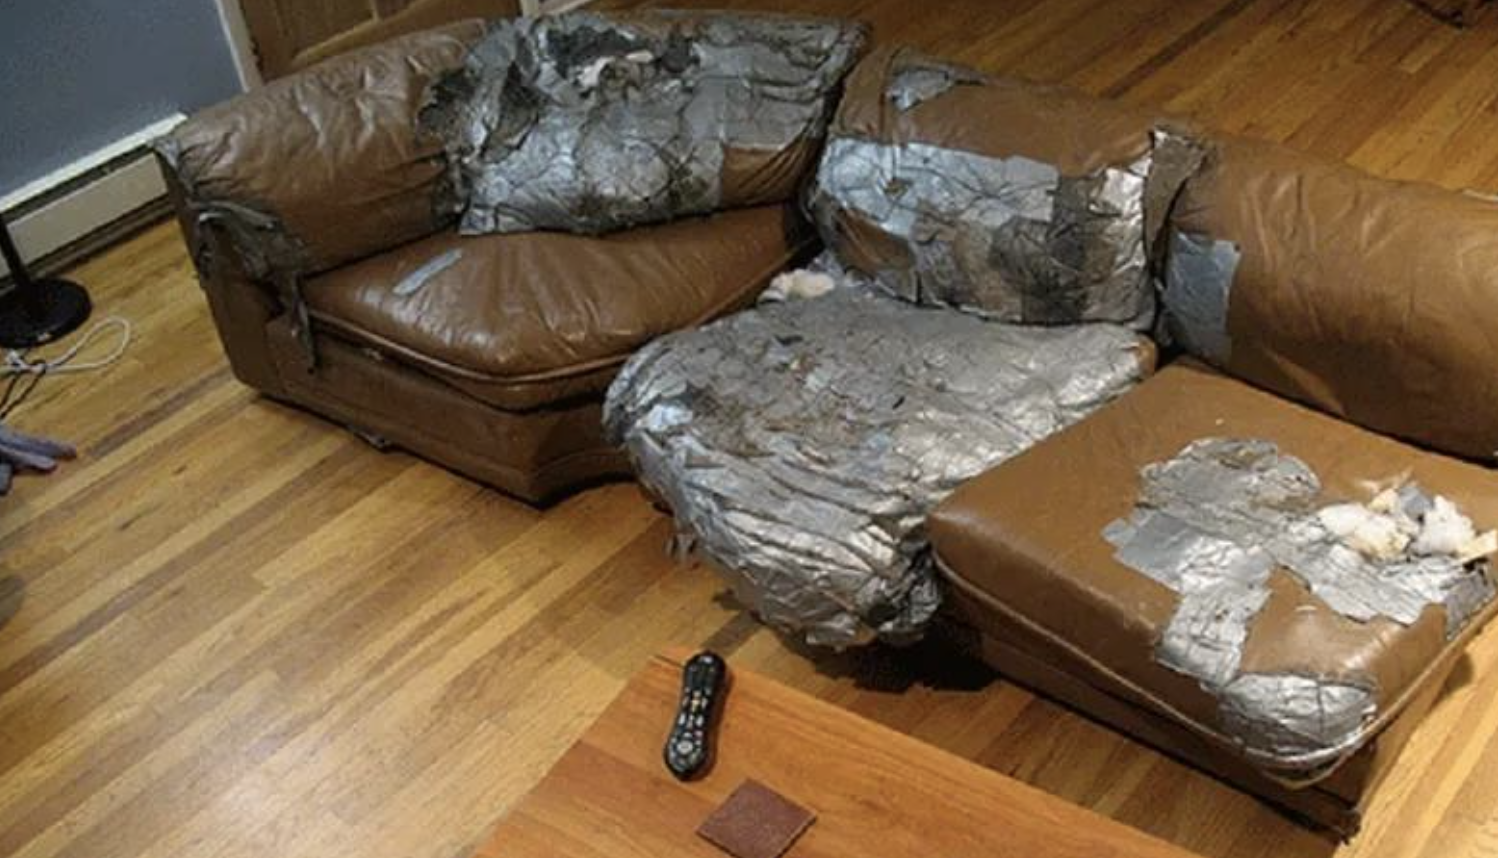 duct tape on the couch